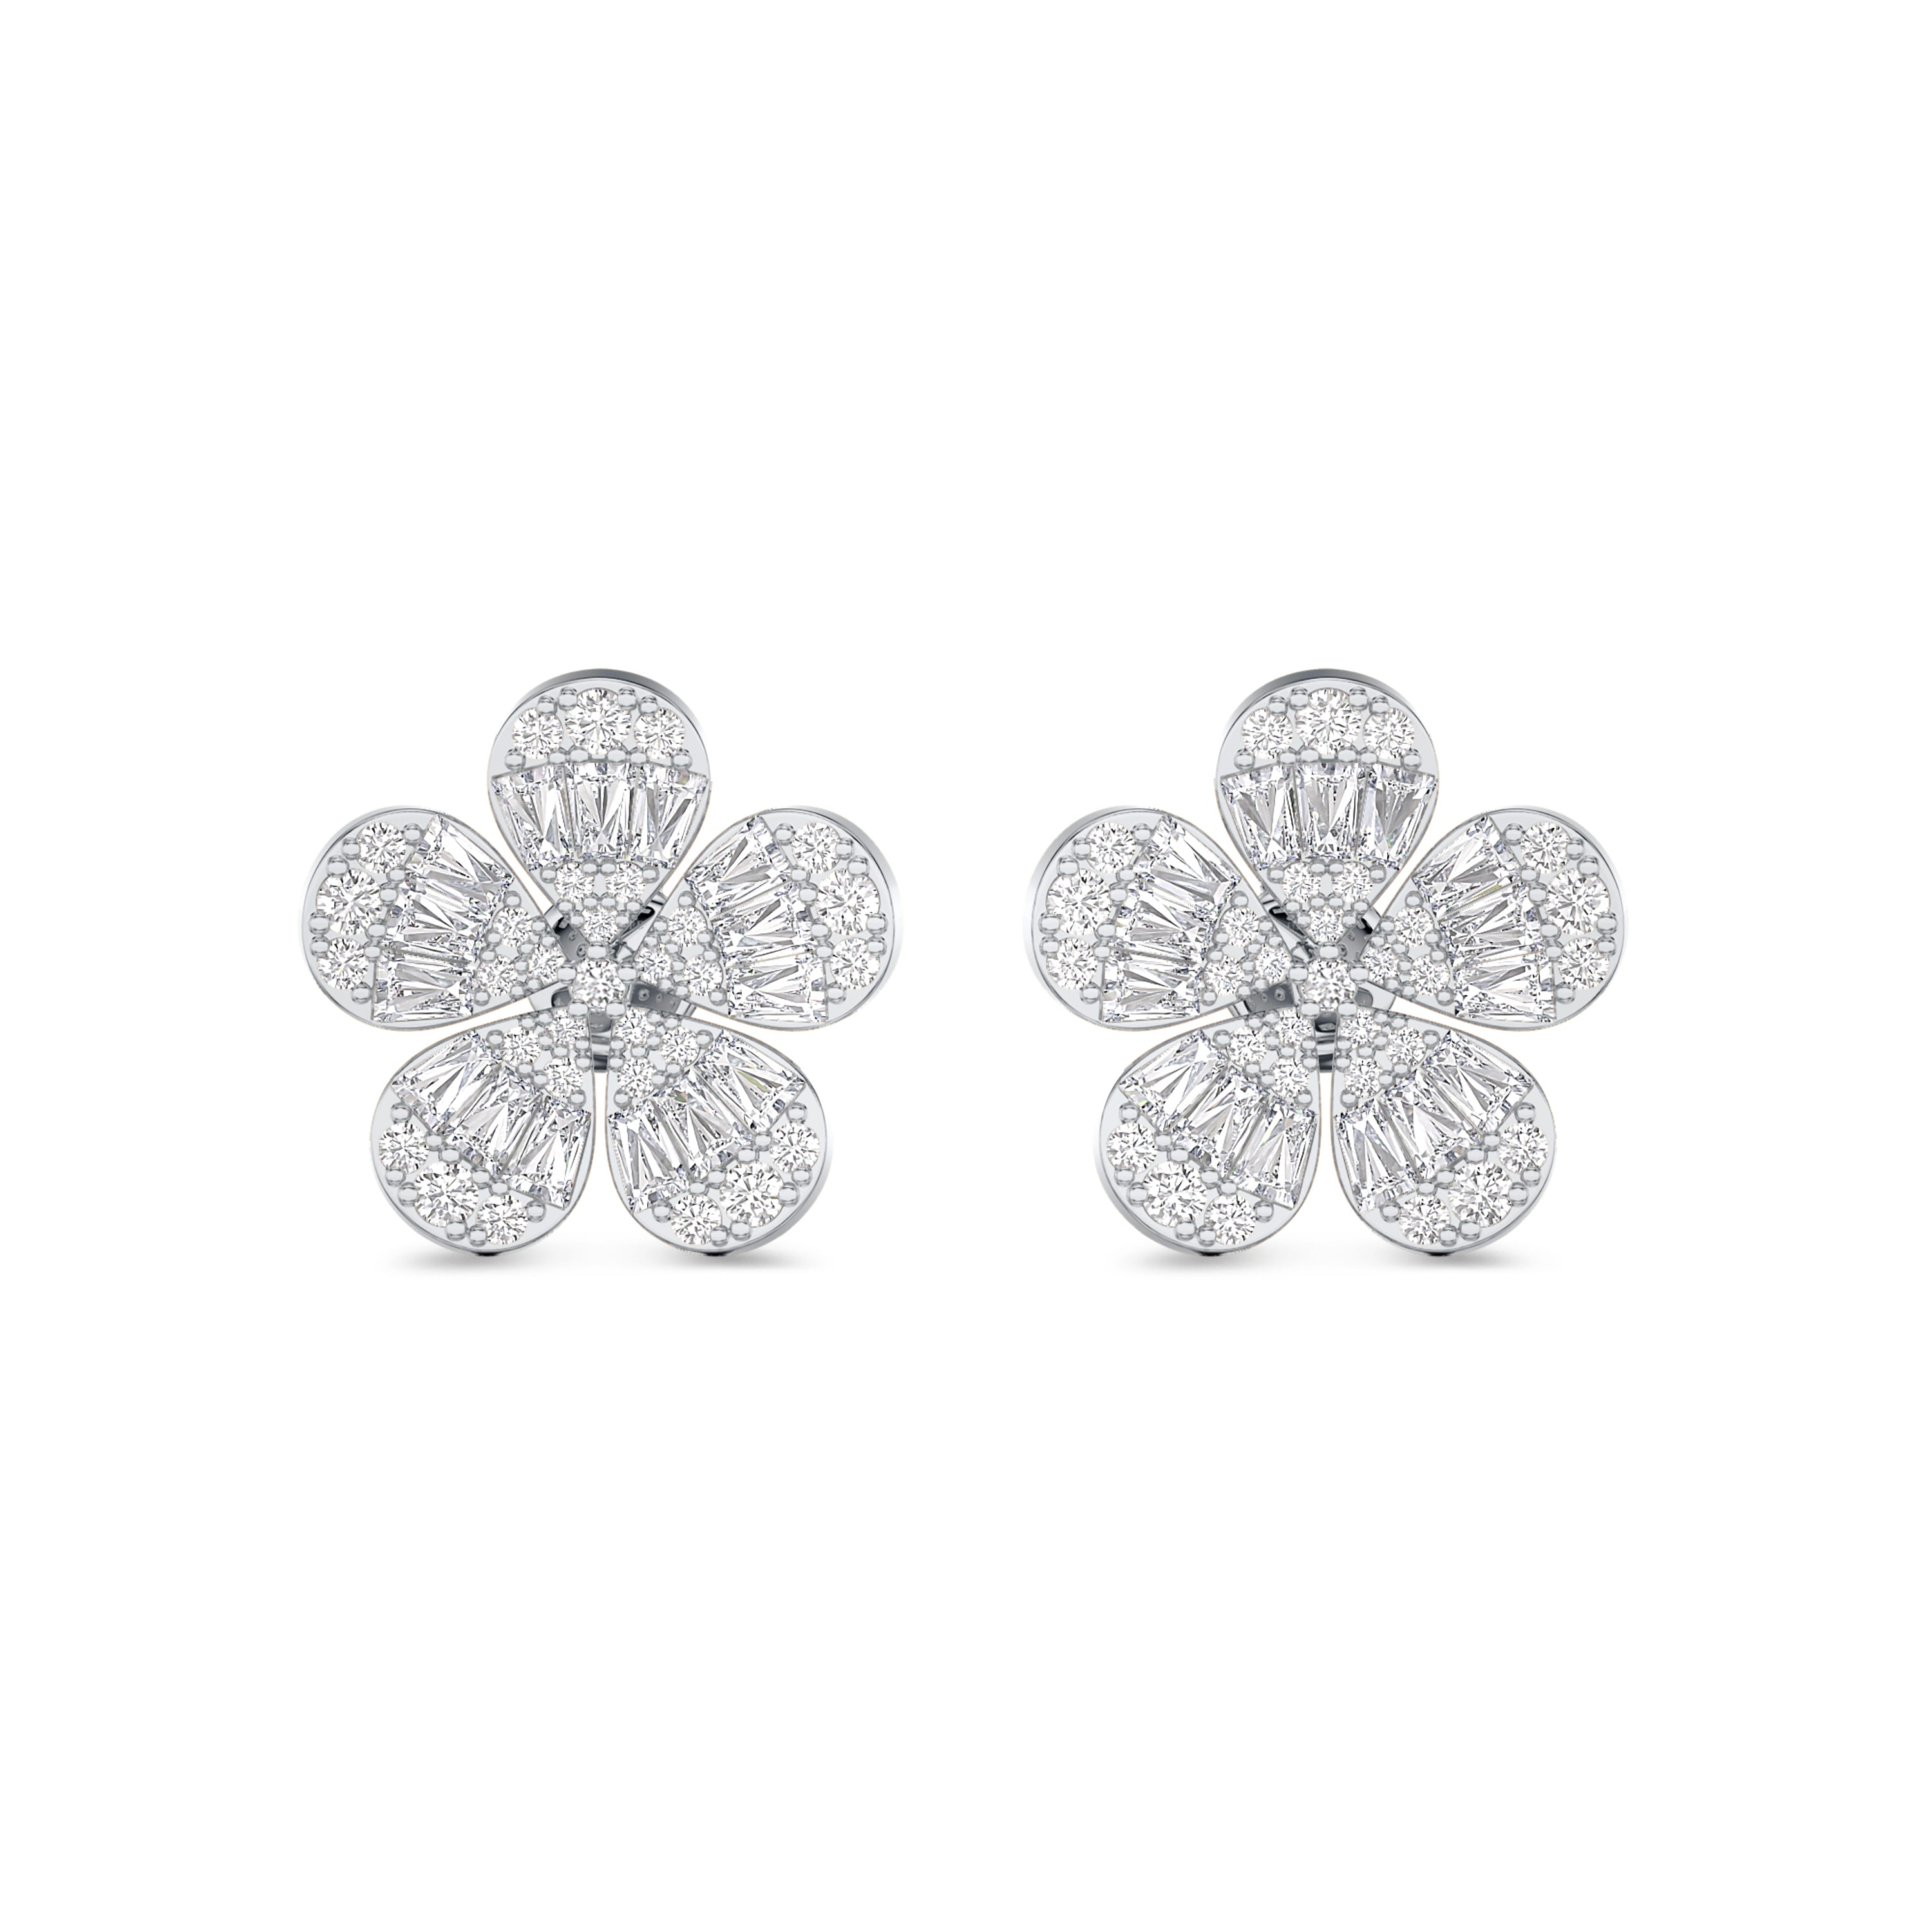 Flower diamond earring in 18K white gold, FG color and VS-SI clarity, 1.05 carat